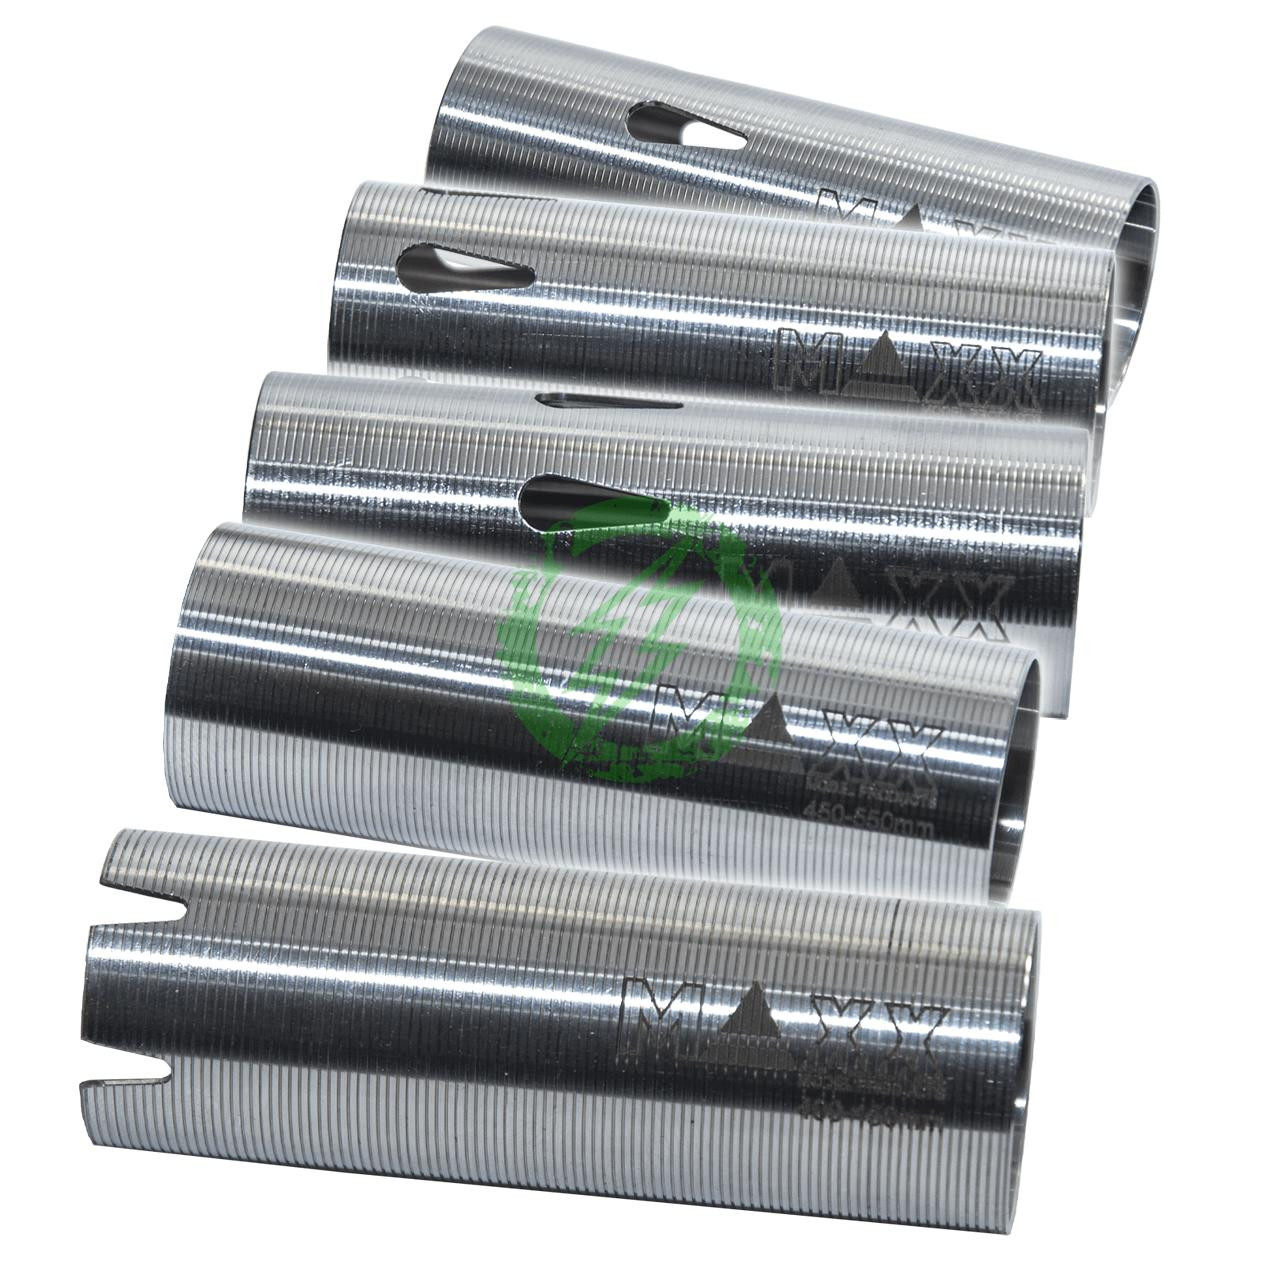  MAXX CNC Hardened Stainless Steel Cylinder 